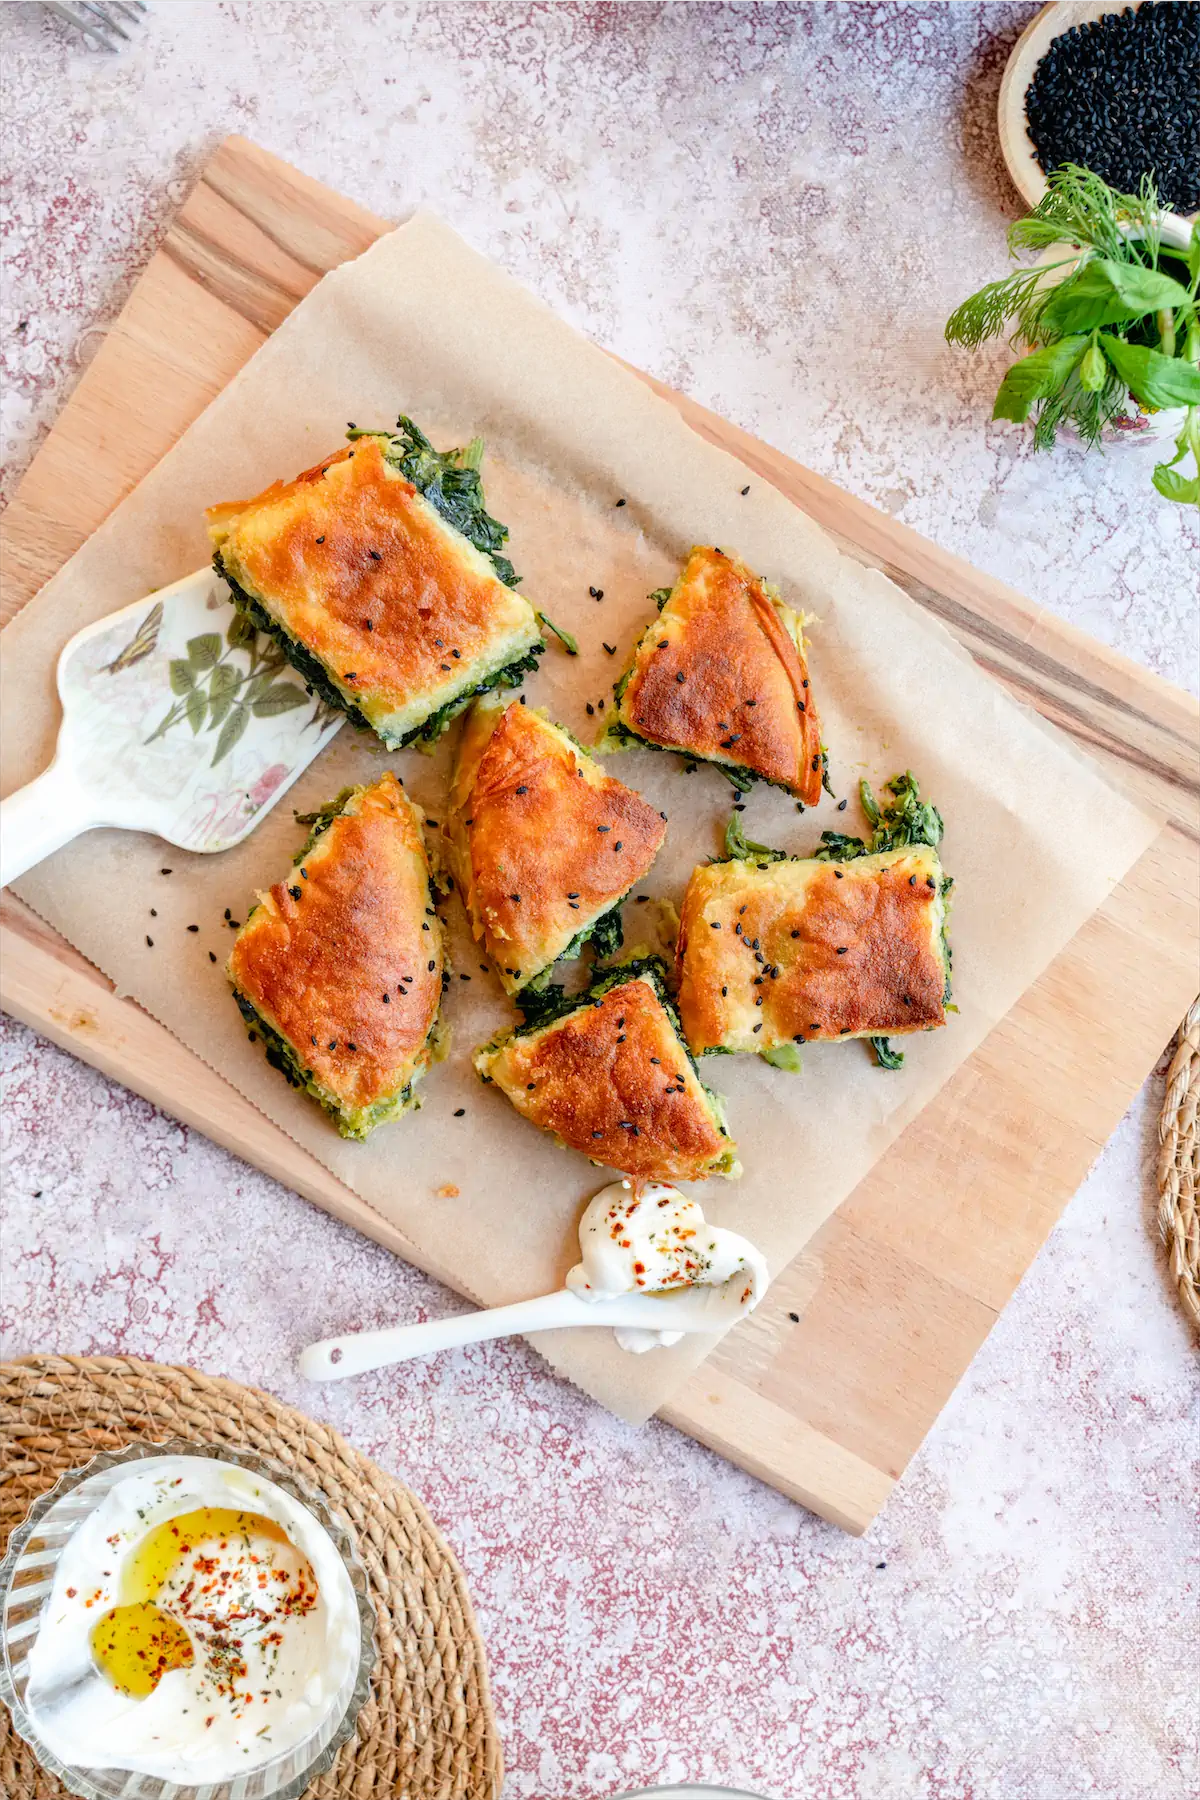 Slices of homemade Spanakopita recipe on parchment paper.